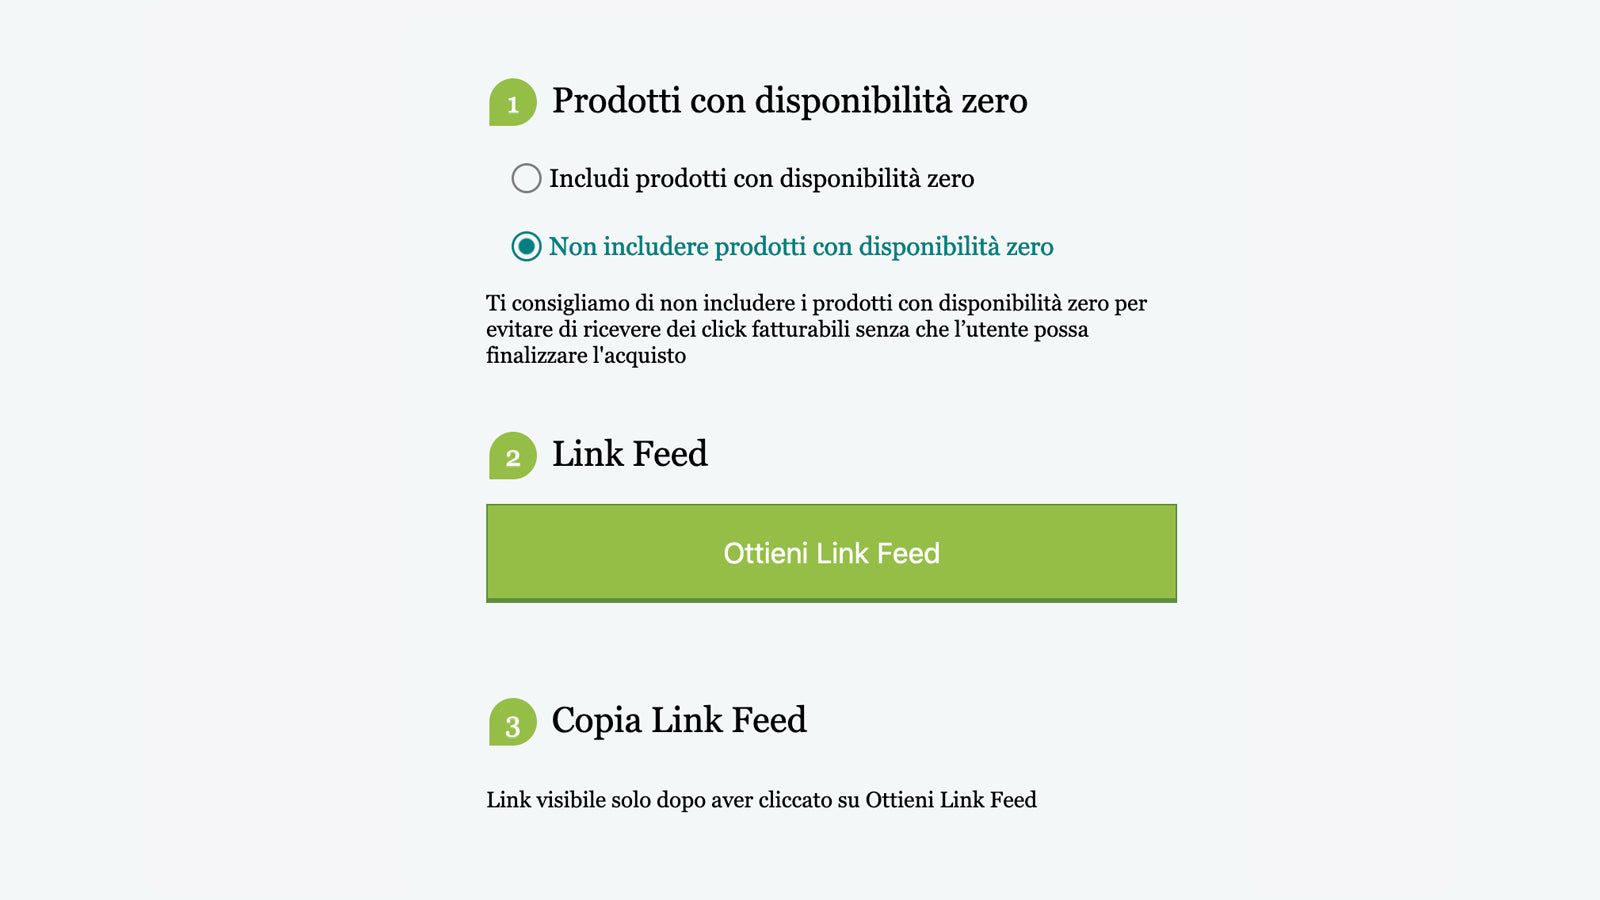 Get Link Feed to export your catalog